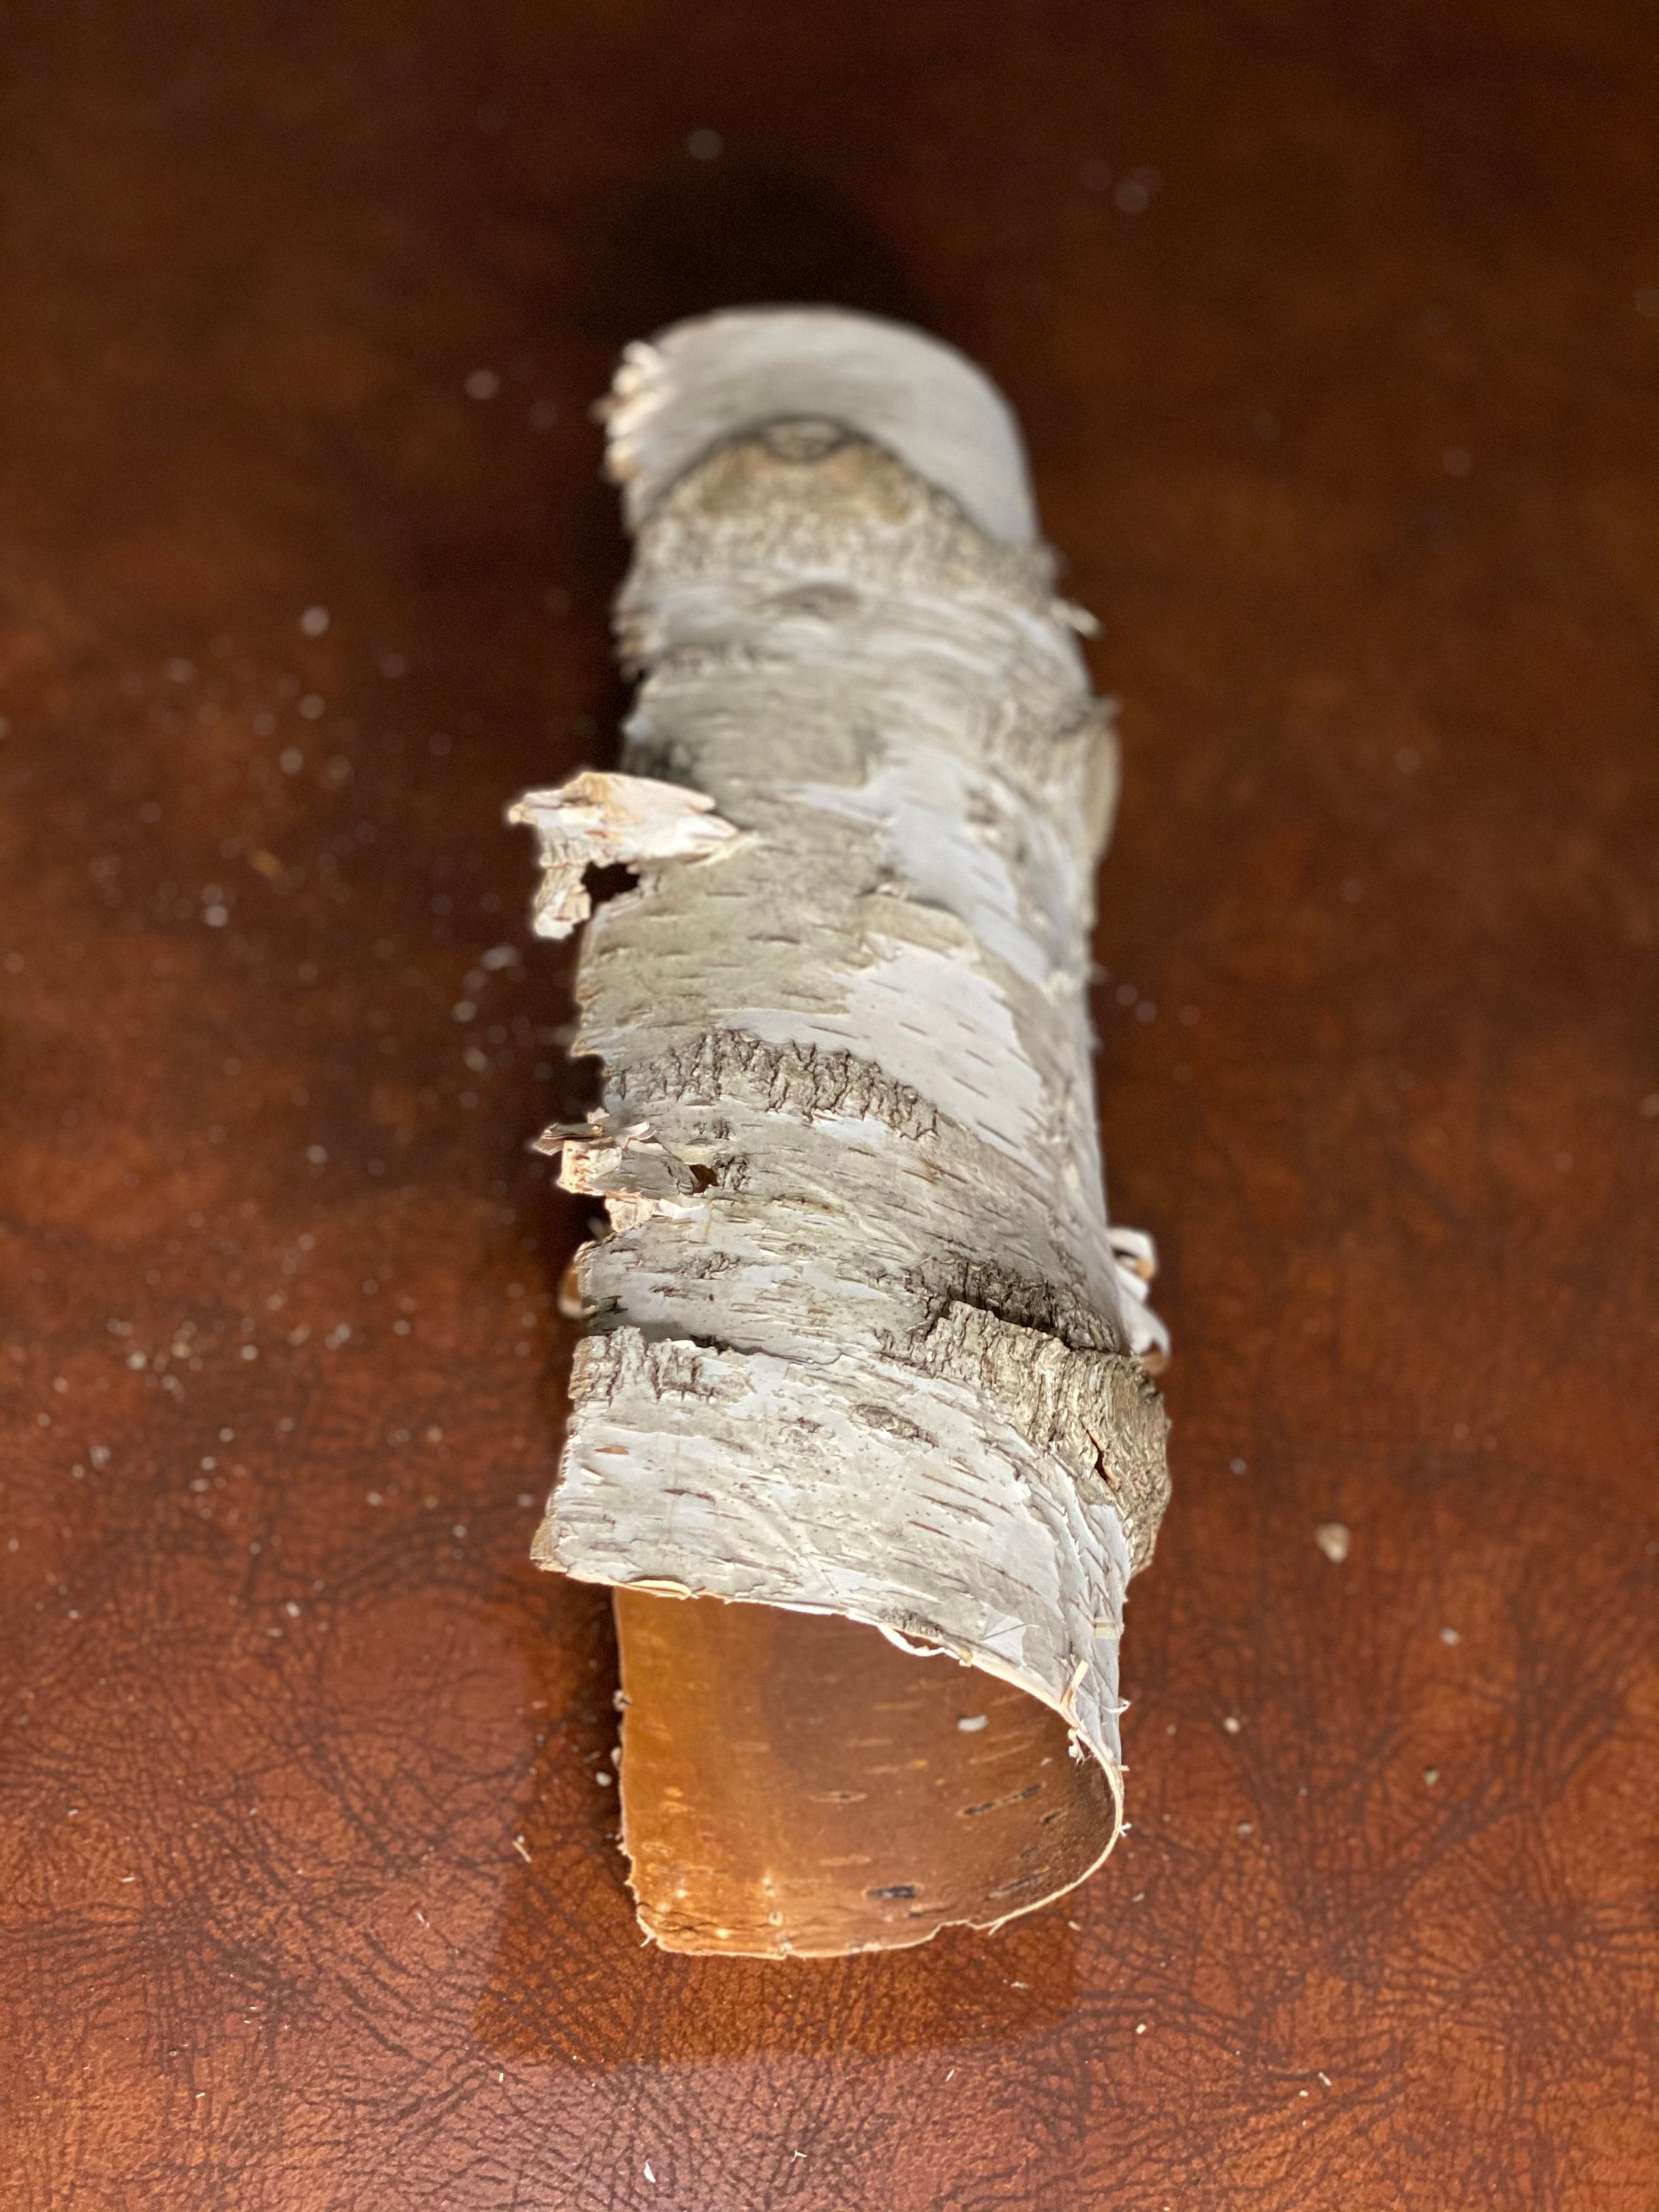 White Birch Tube, Approximately 11.5 Inches Long by About 3 Inches Diameter